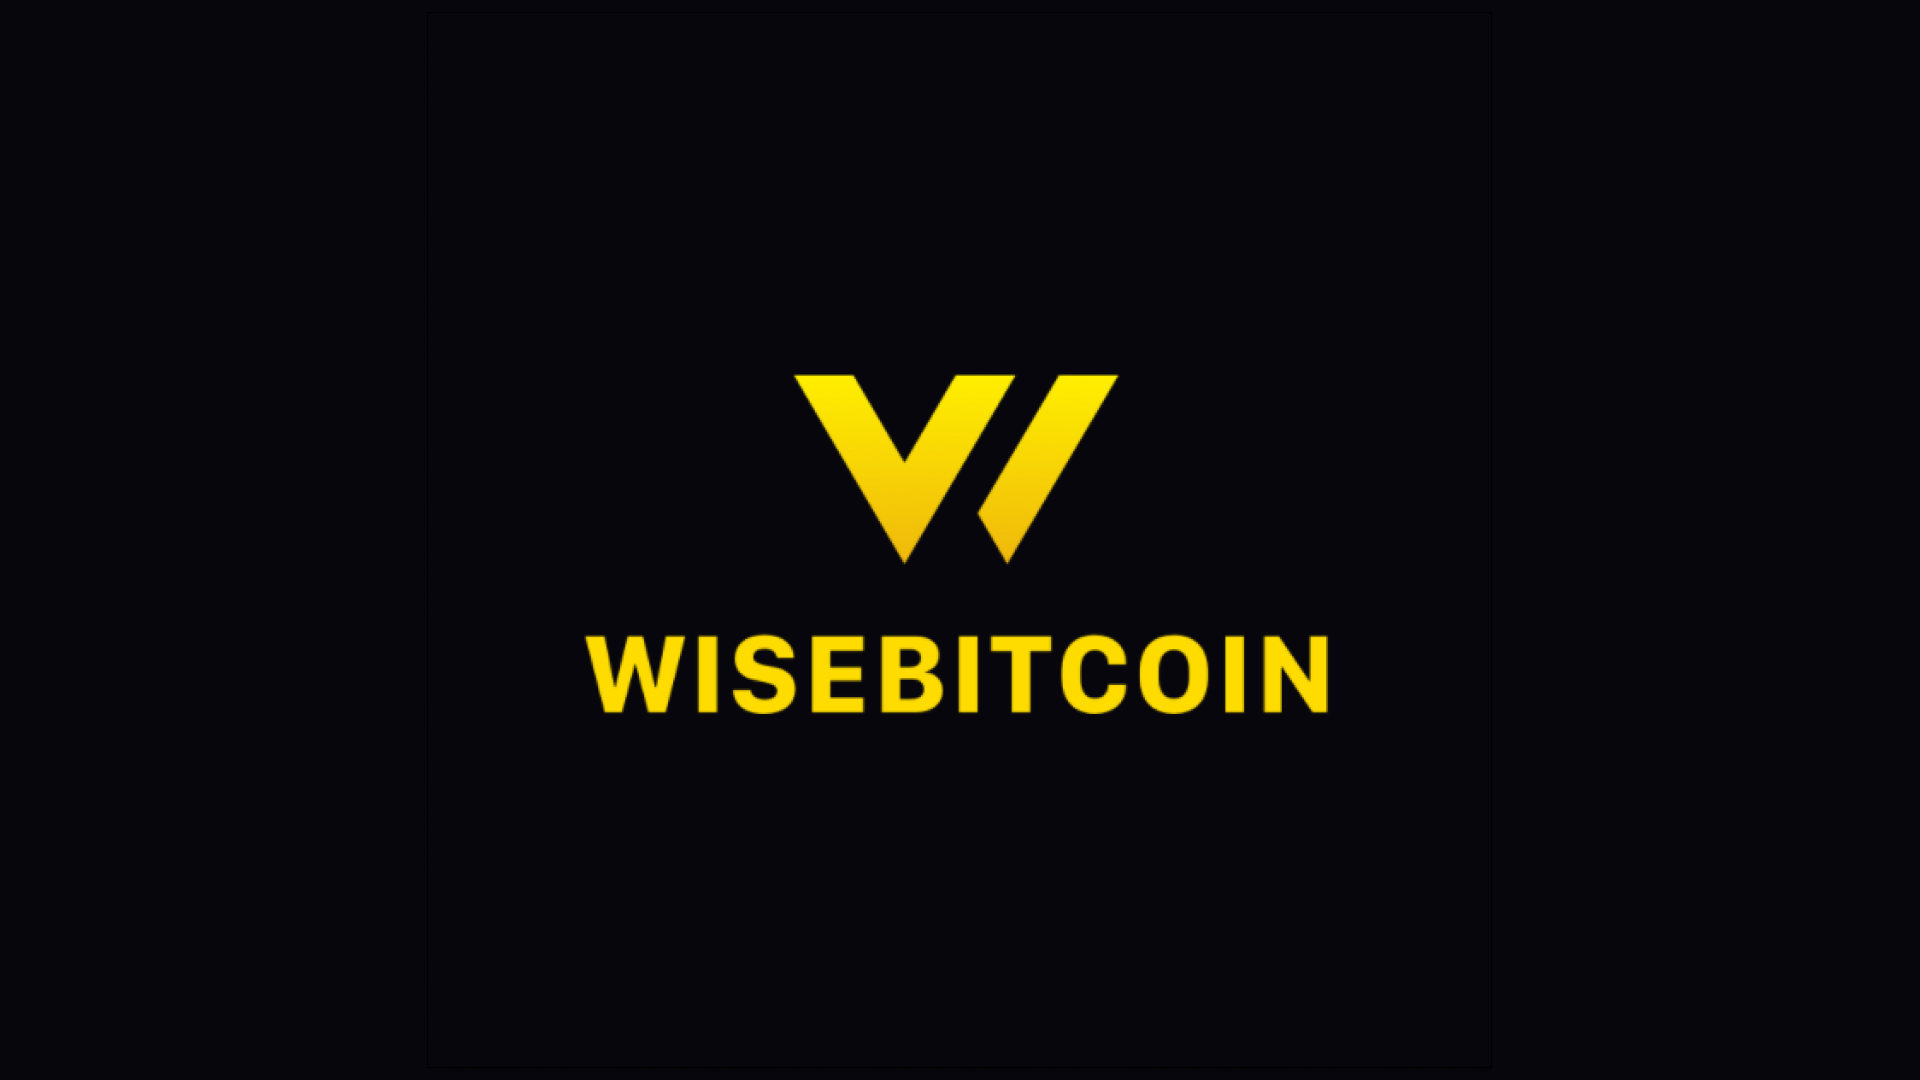 Wisebitcoin: Cryptocurrency Trading Just Got Faster and Easier